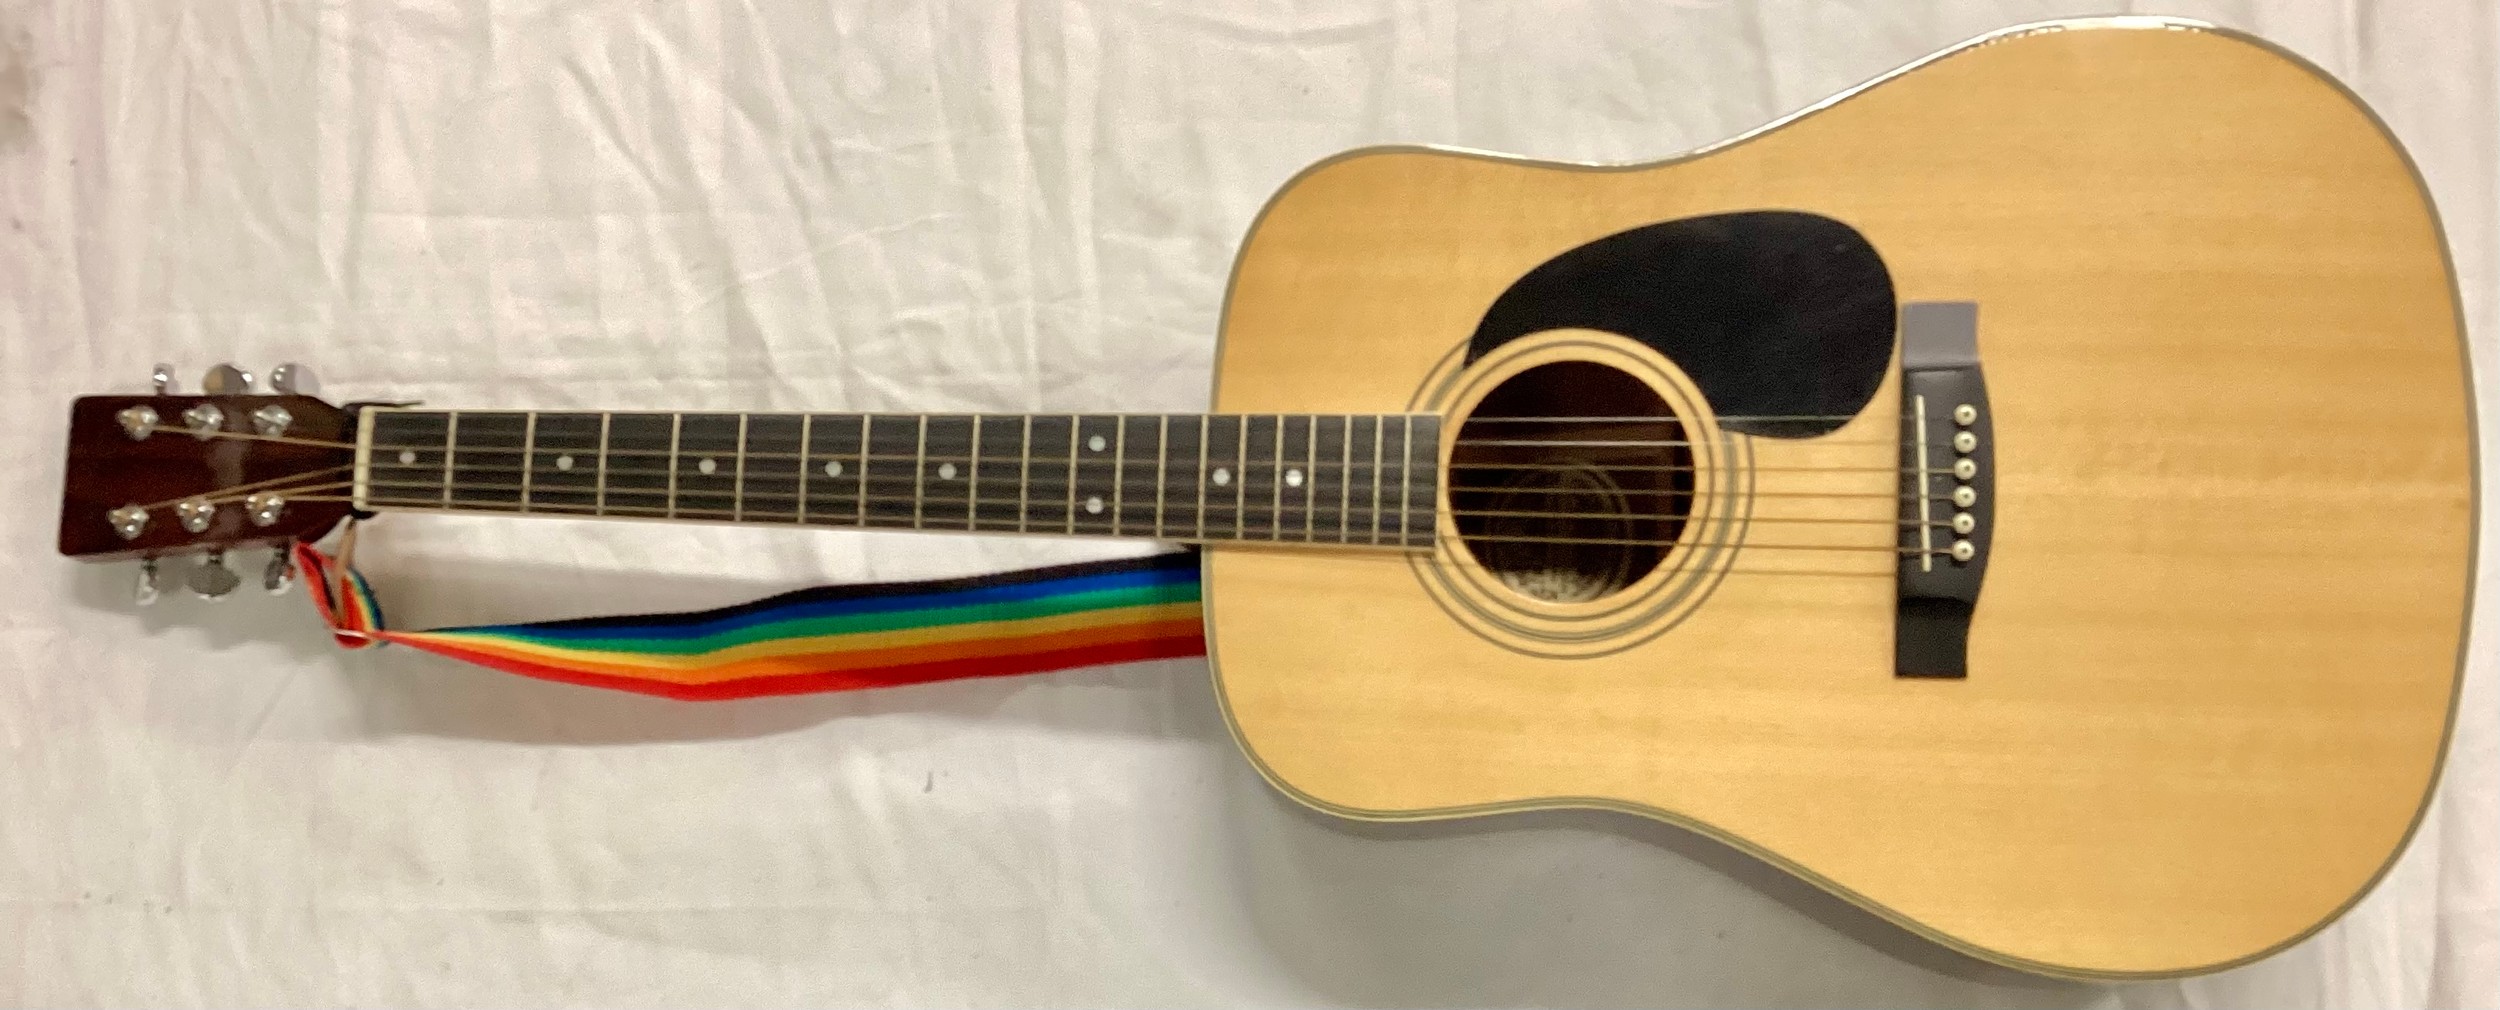 HONDO ACOUSTIC 6 STRING GUITAR. This is model No. H35 which is from the early 1980's and a copy of